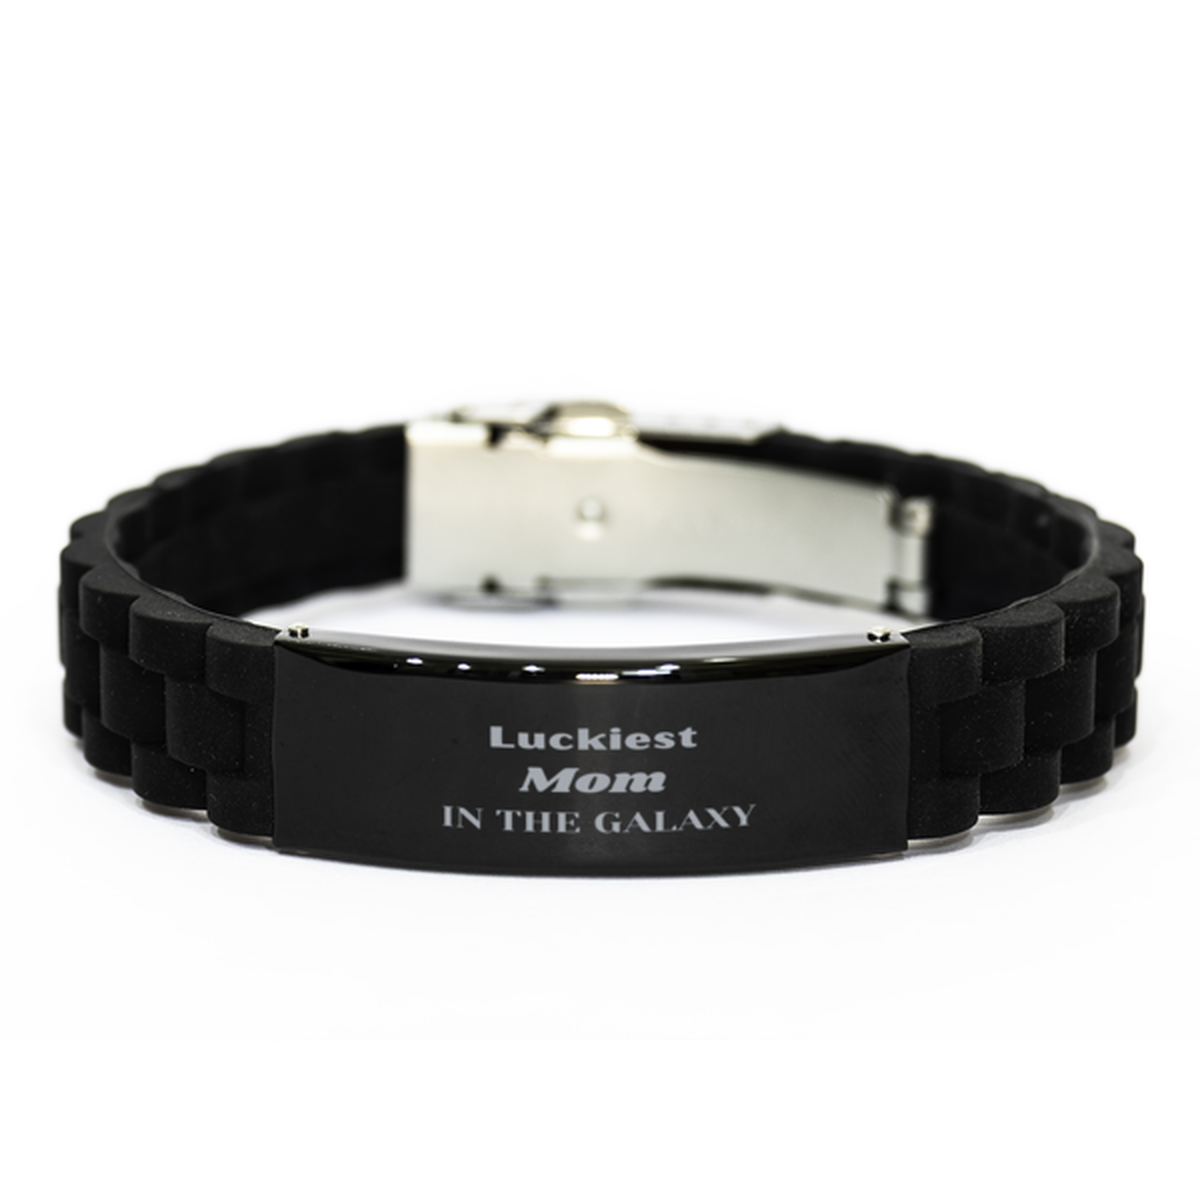 Luckiest Mom in the Galaxy, To My Mom Engraved Gifts, Christmas Mom Black Glidelock Clasp Bracelet Gifts, X-mas Birthday Unique Gifts For Mom Men Women